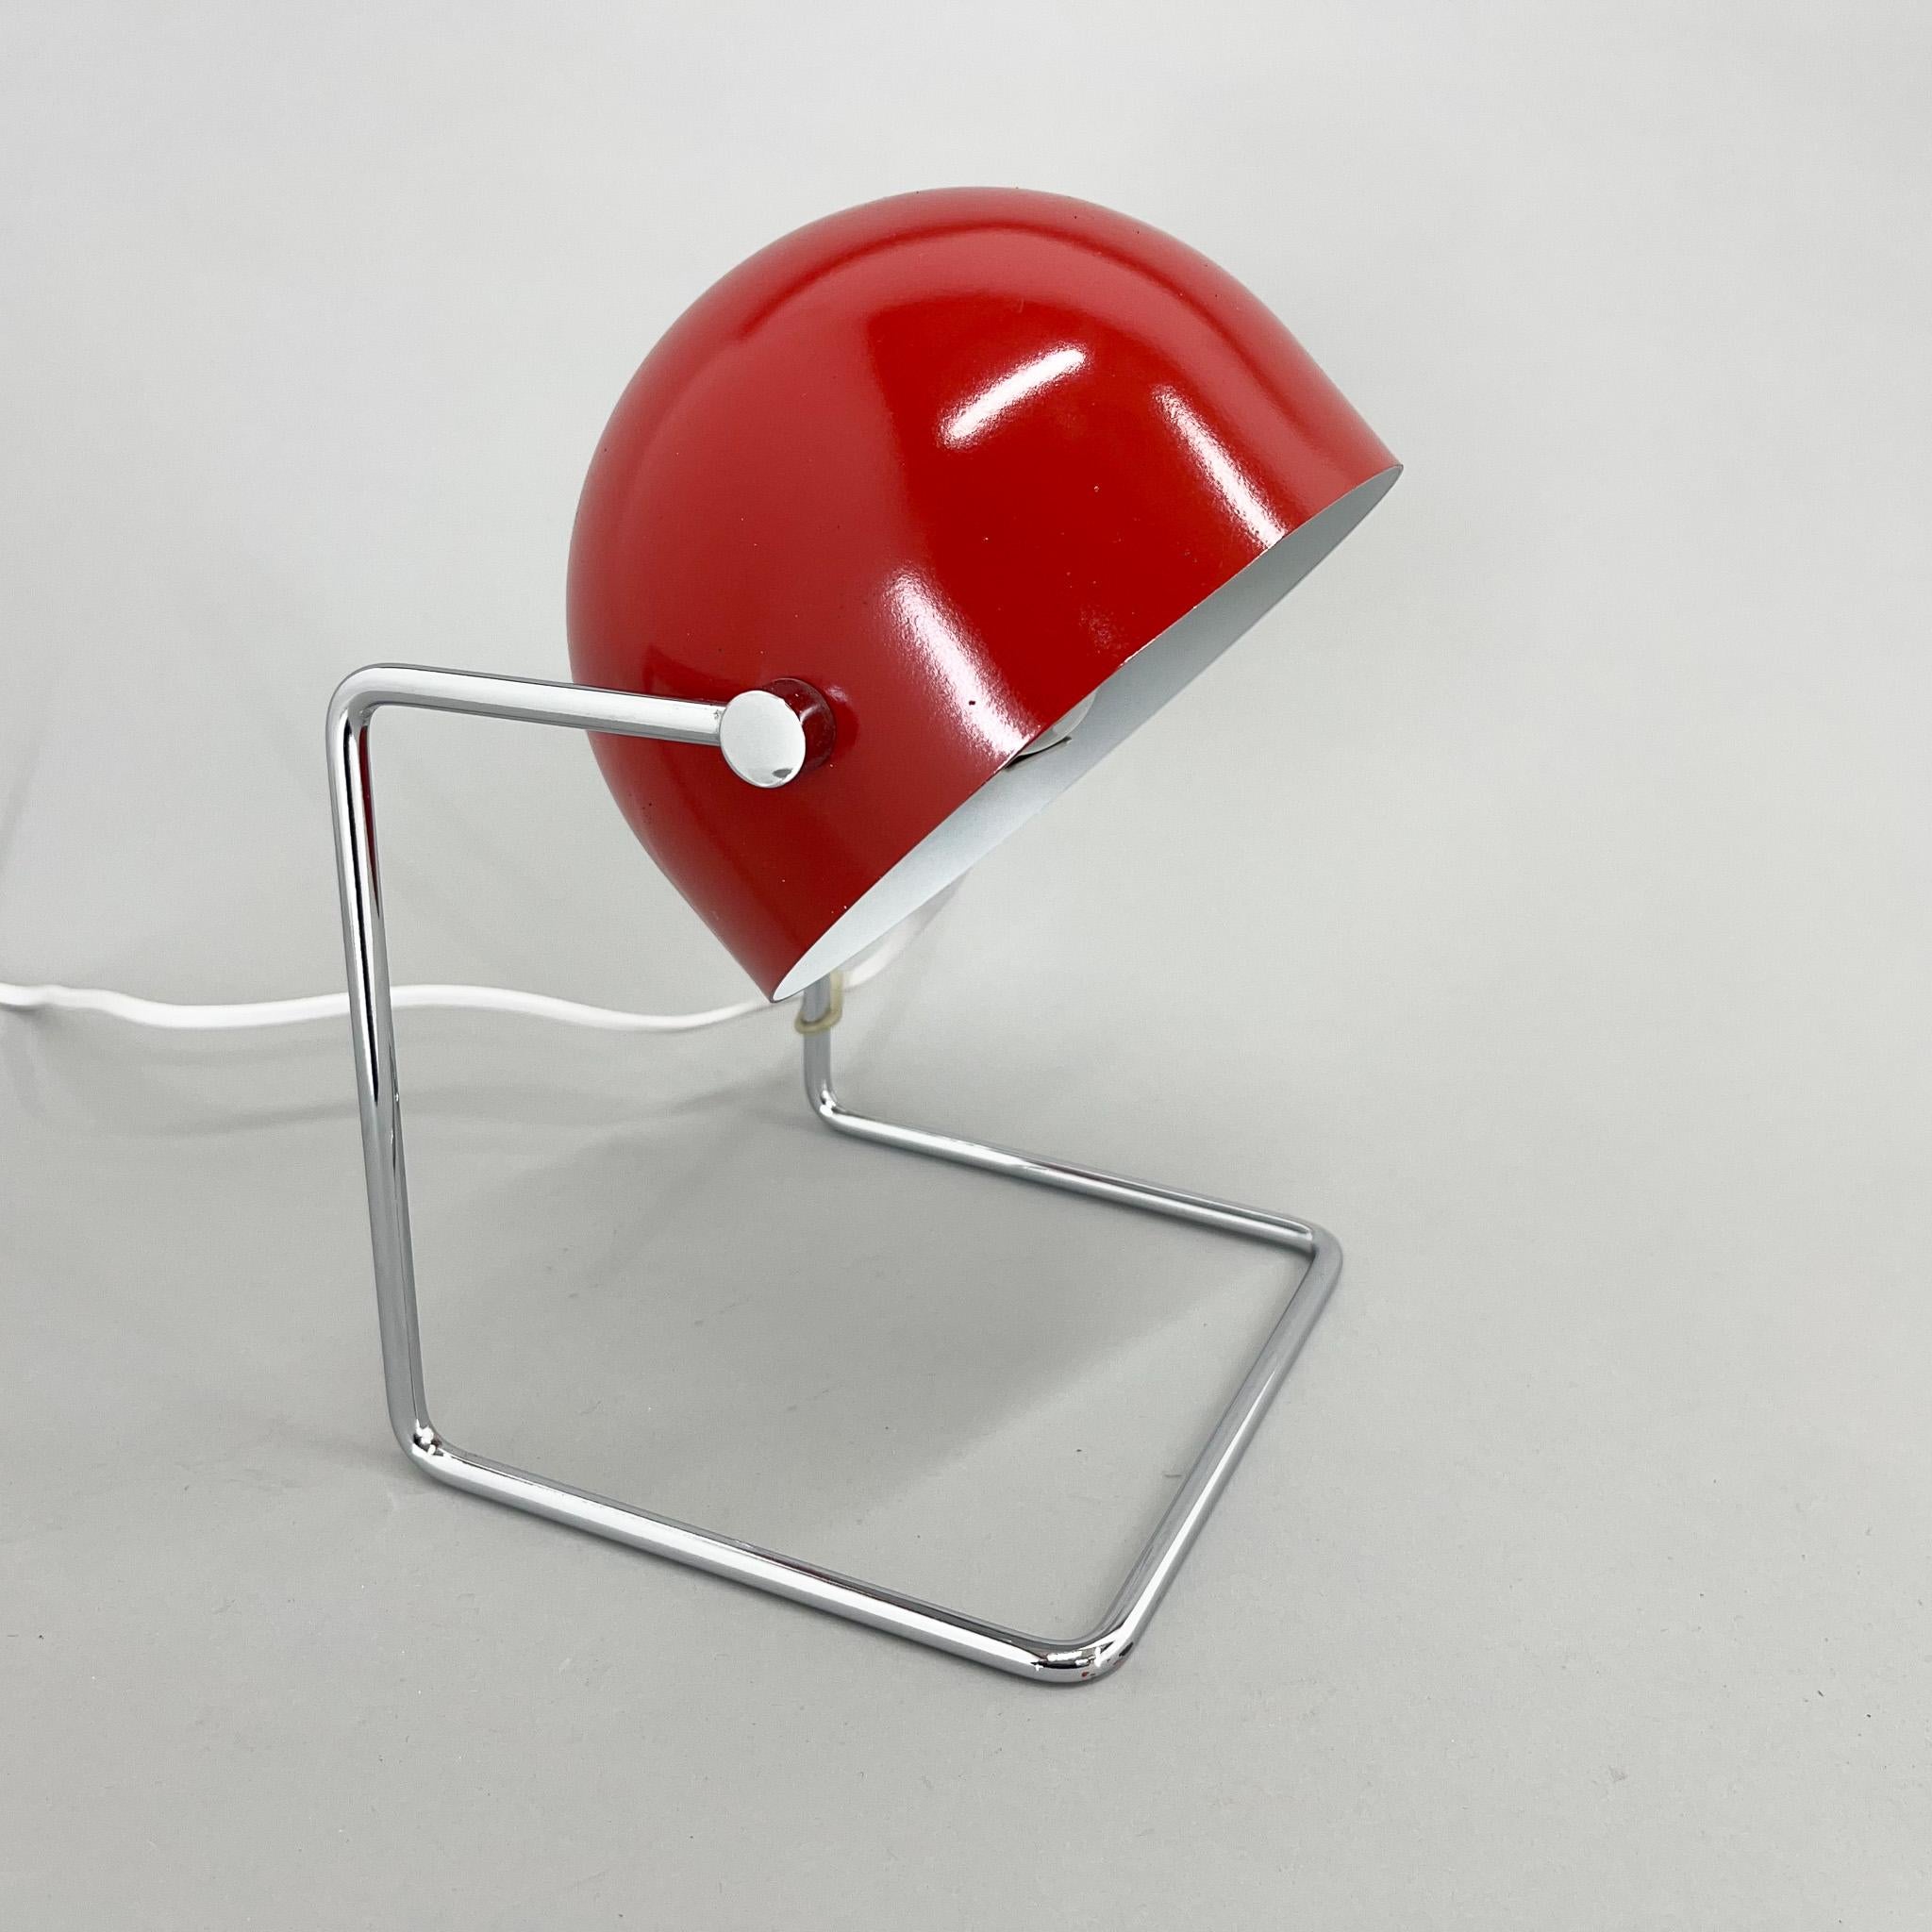 Rare model of mid-century chrome & metal table lamp designed by famous Josef Hurka for Napako in the 1960's. Very good vintage condition. The lamp was completely renovated with new wiring.